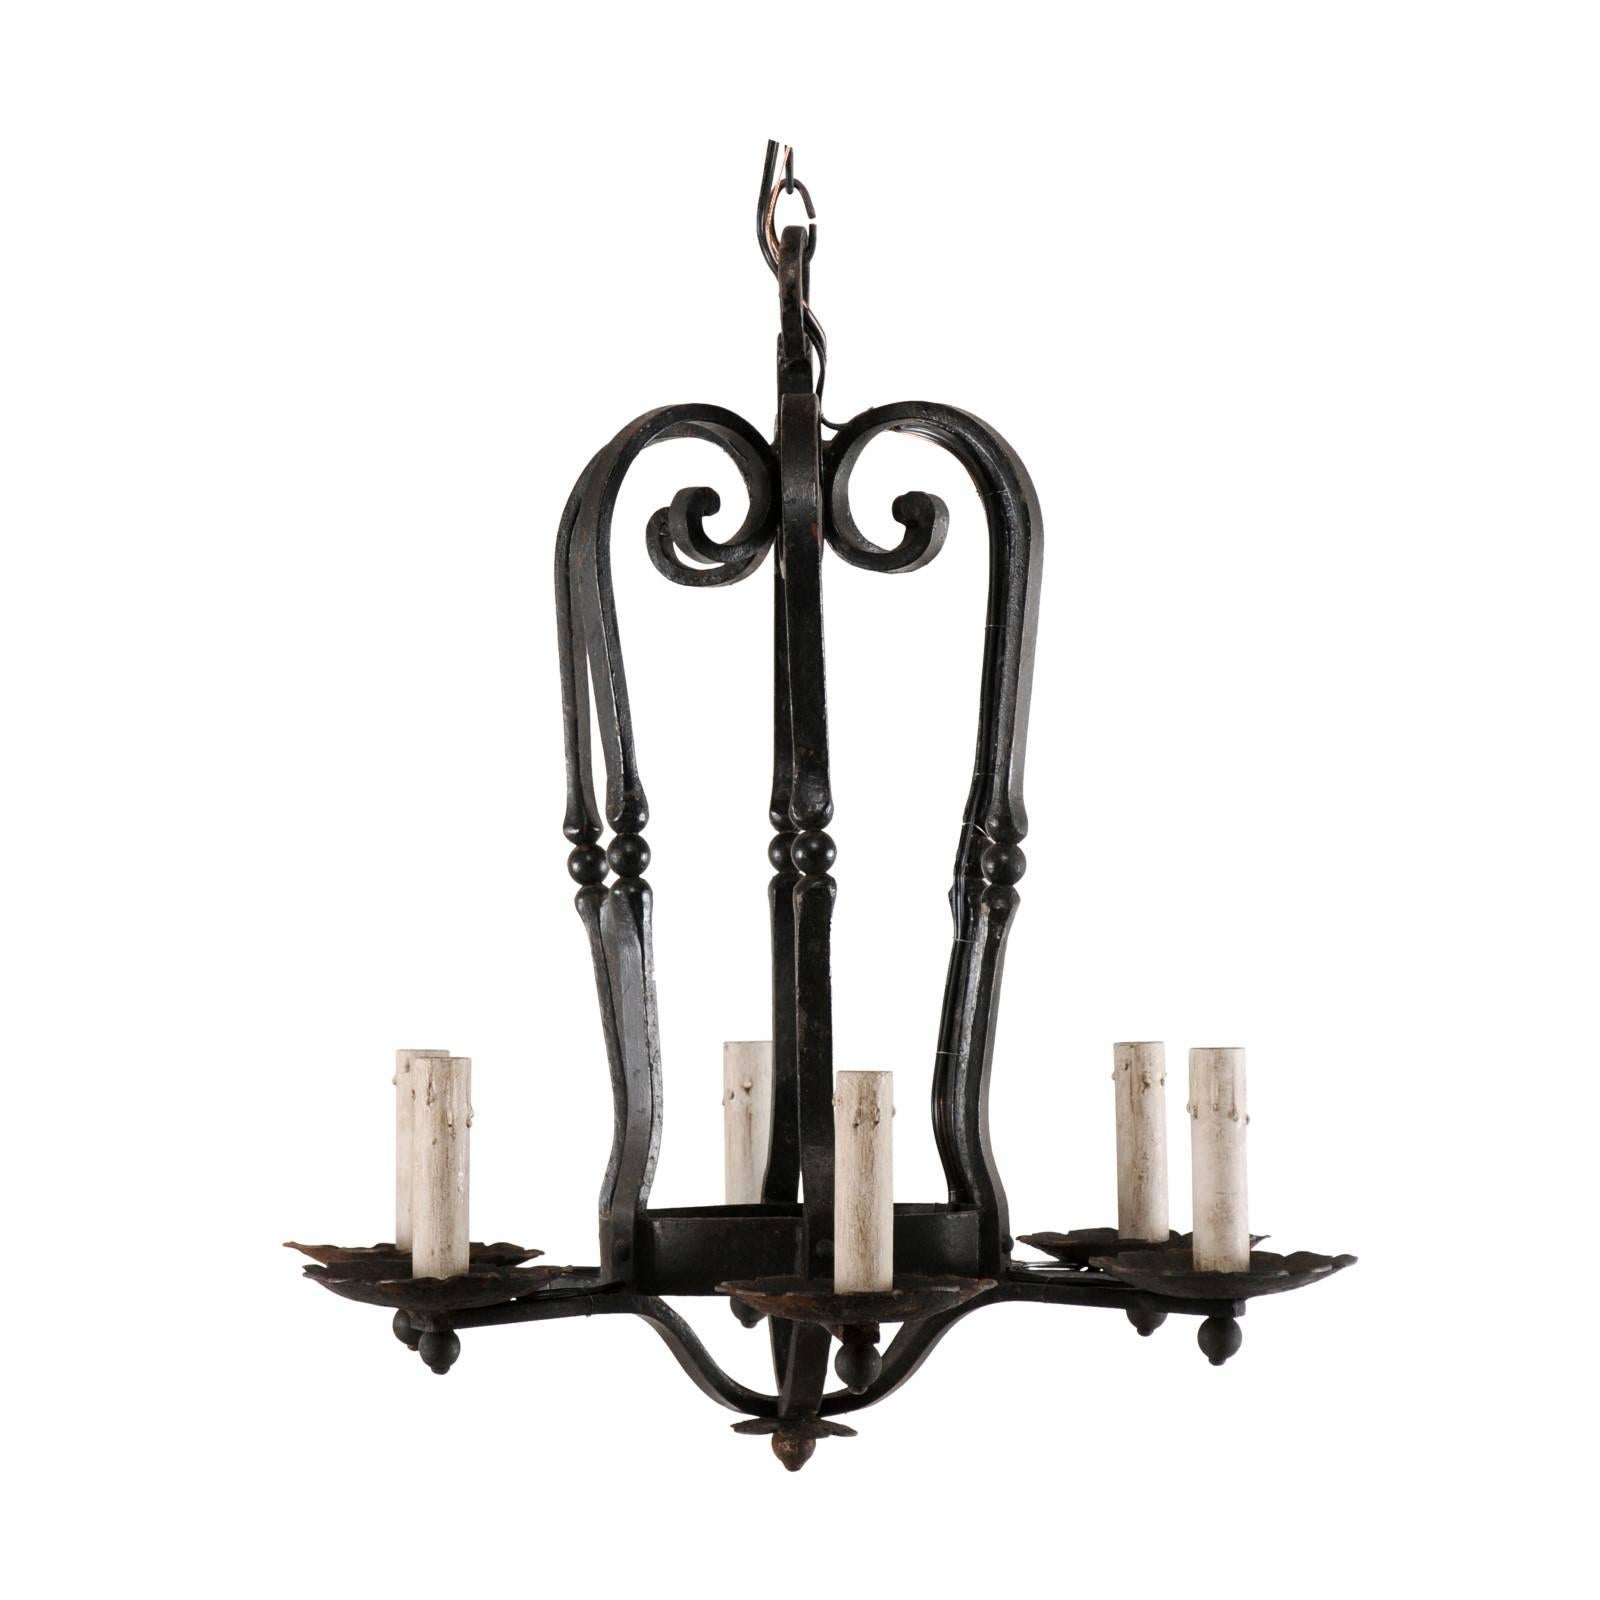 An Elegant French Six Light Scrolling Black Forged-Iron Chandelier, Rewired